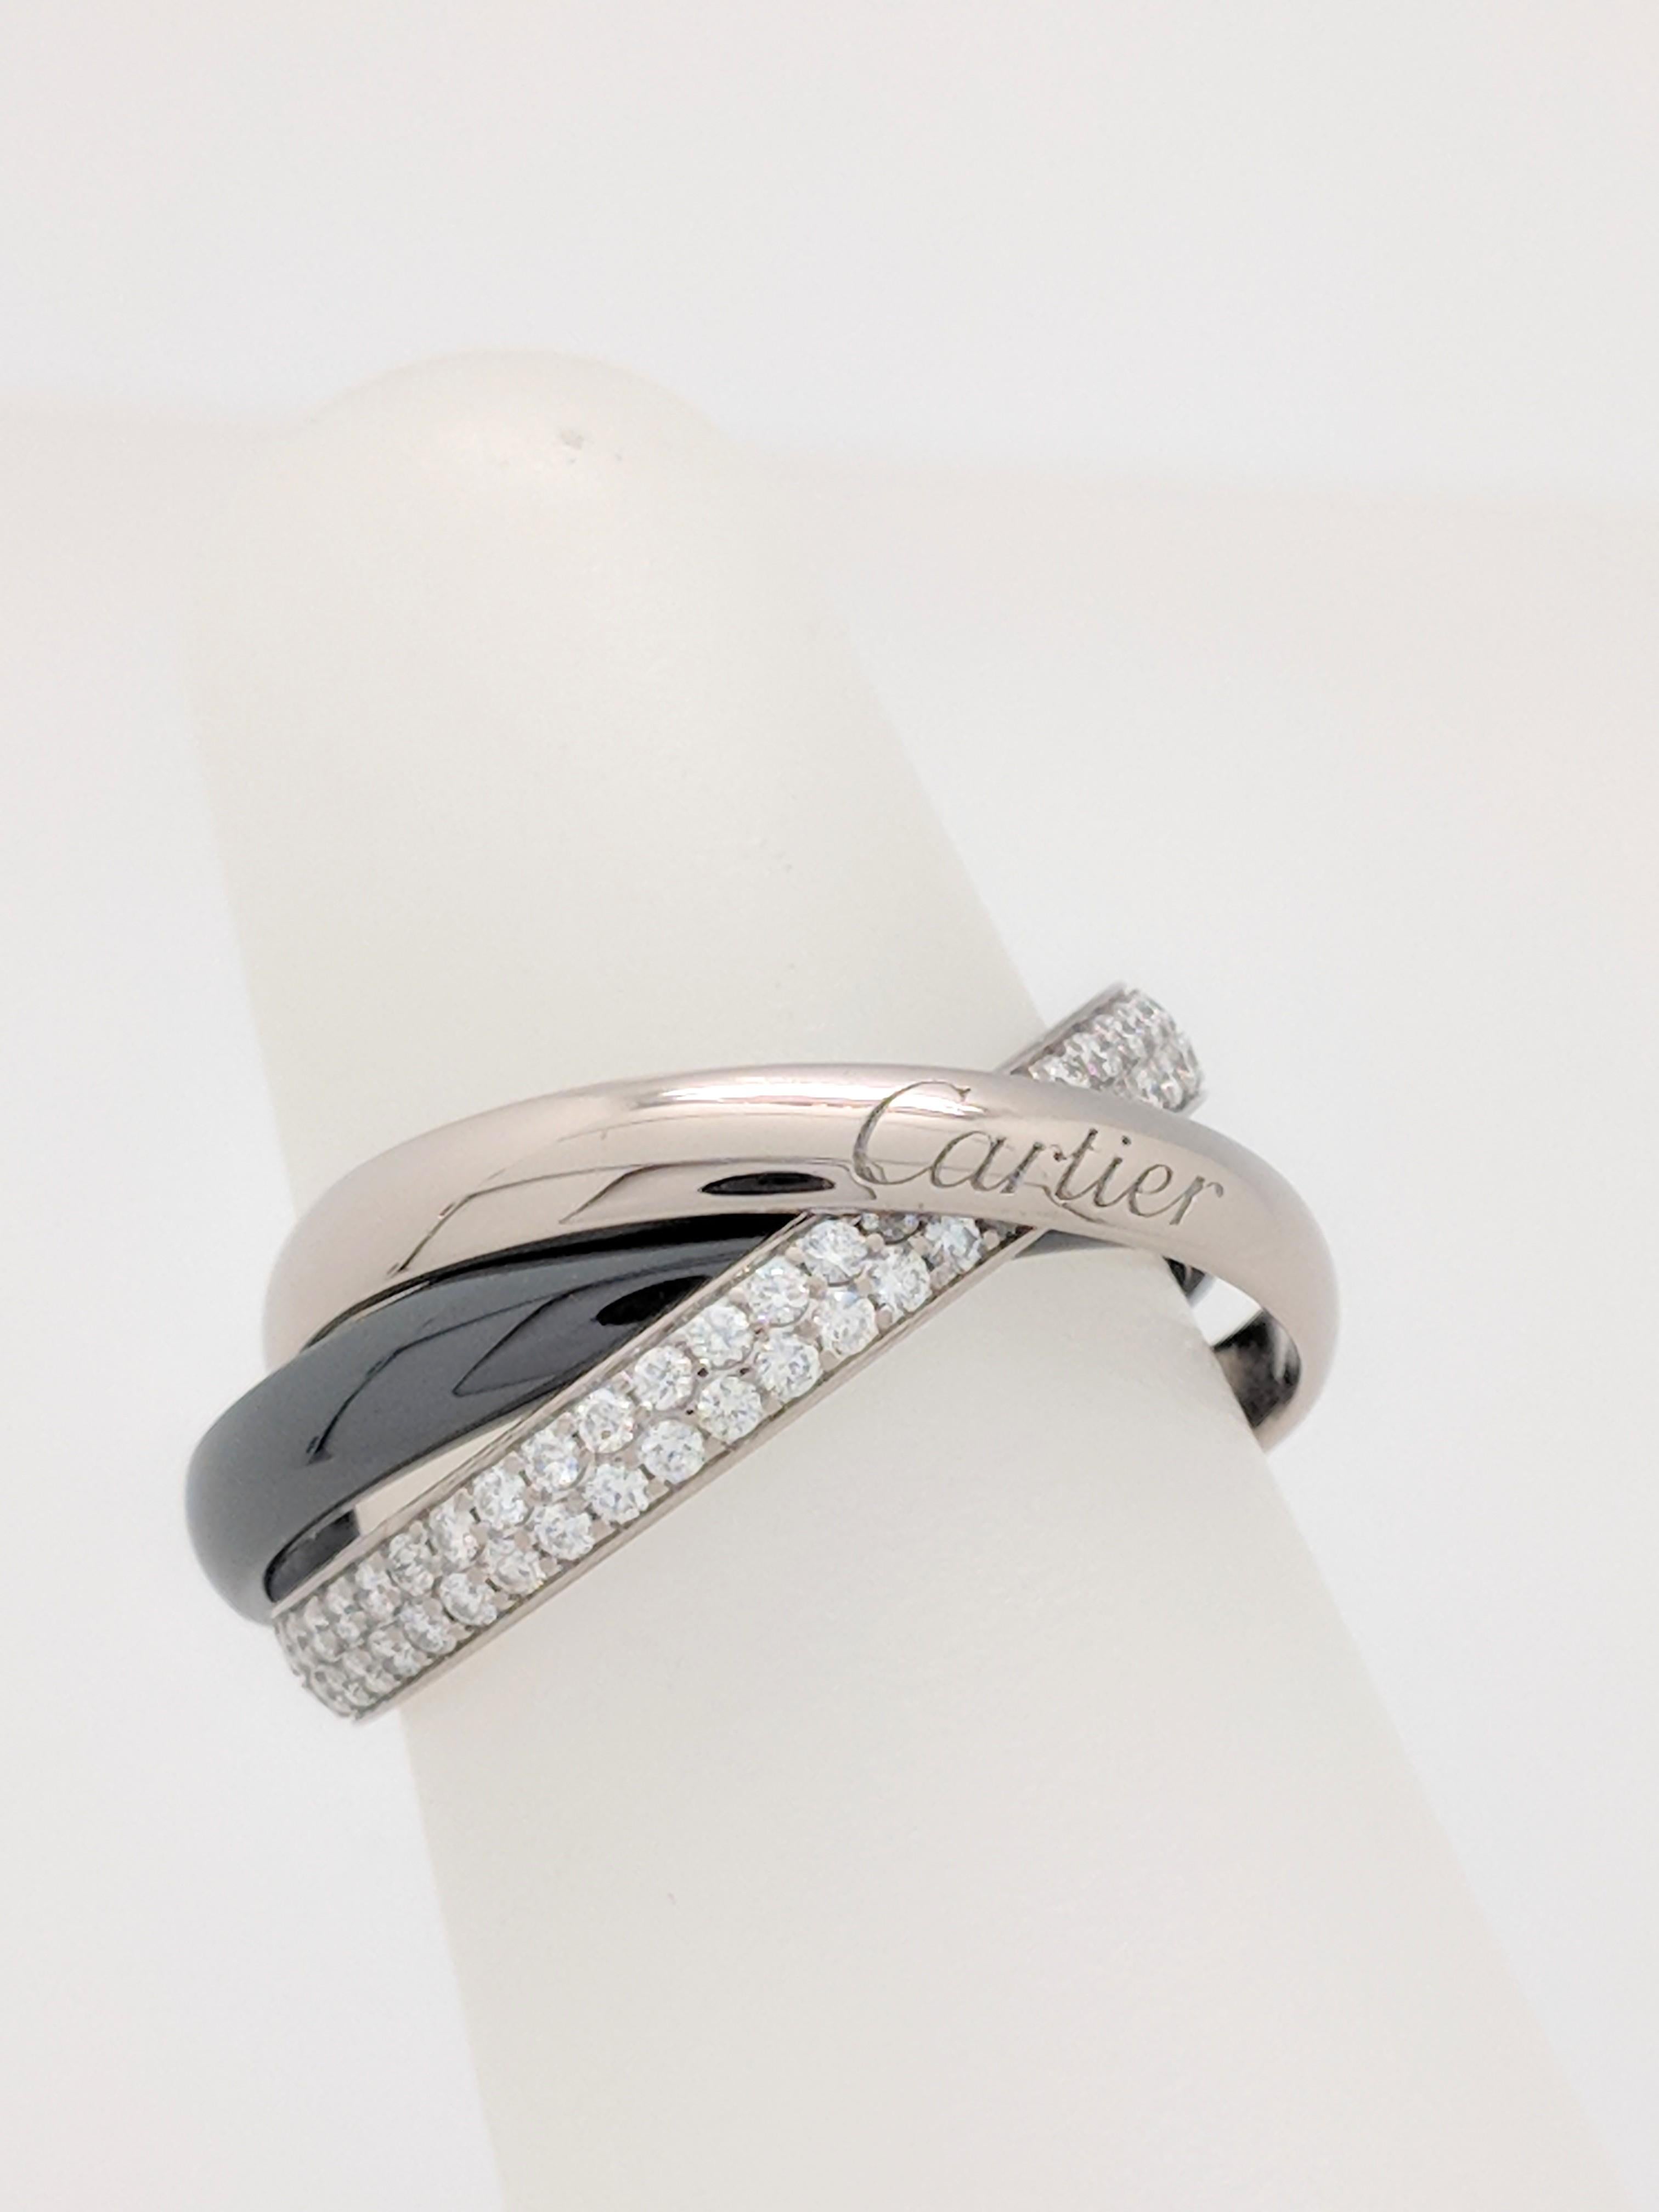 Authentic Cartier Trinity De Cartier Diamond, White Gold and Ceramic Ring 52 (US 6)

You are viewing an Authentic Cartier Trinity Diamond, White Gold and Ceramic Ring. Trinity ring, small model, 18K white gold, black ceramic, set with 100